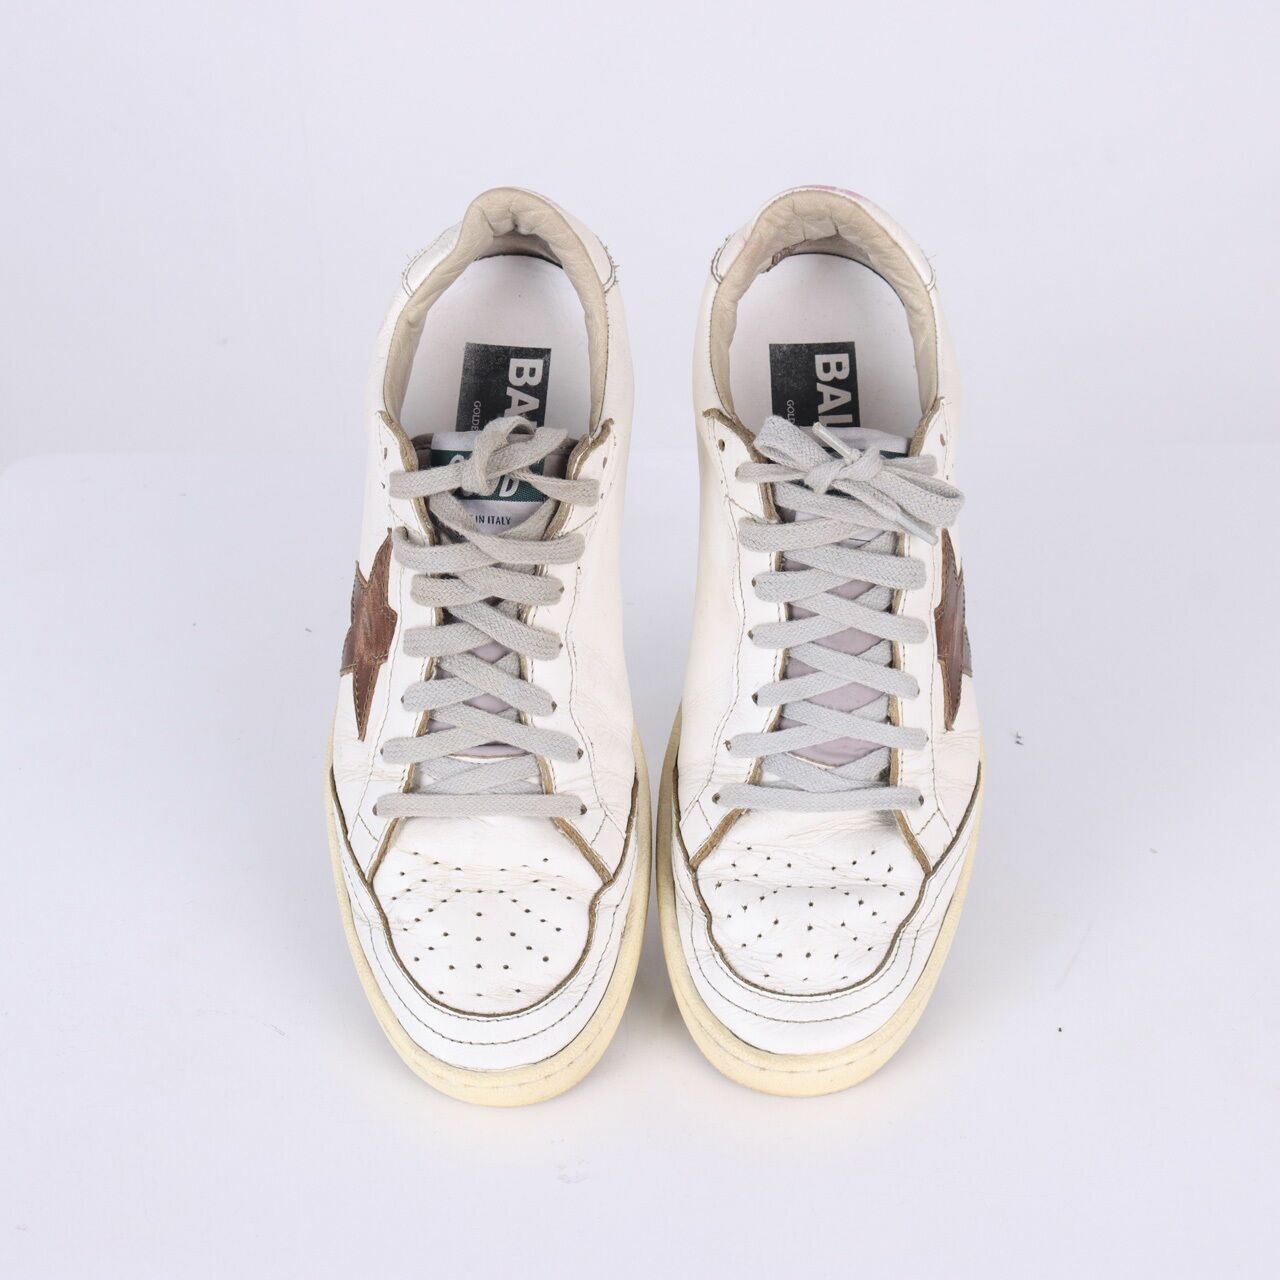 Golden Goose Ball Star Leathet Trainers White Sneakers